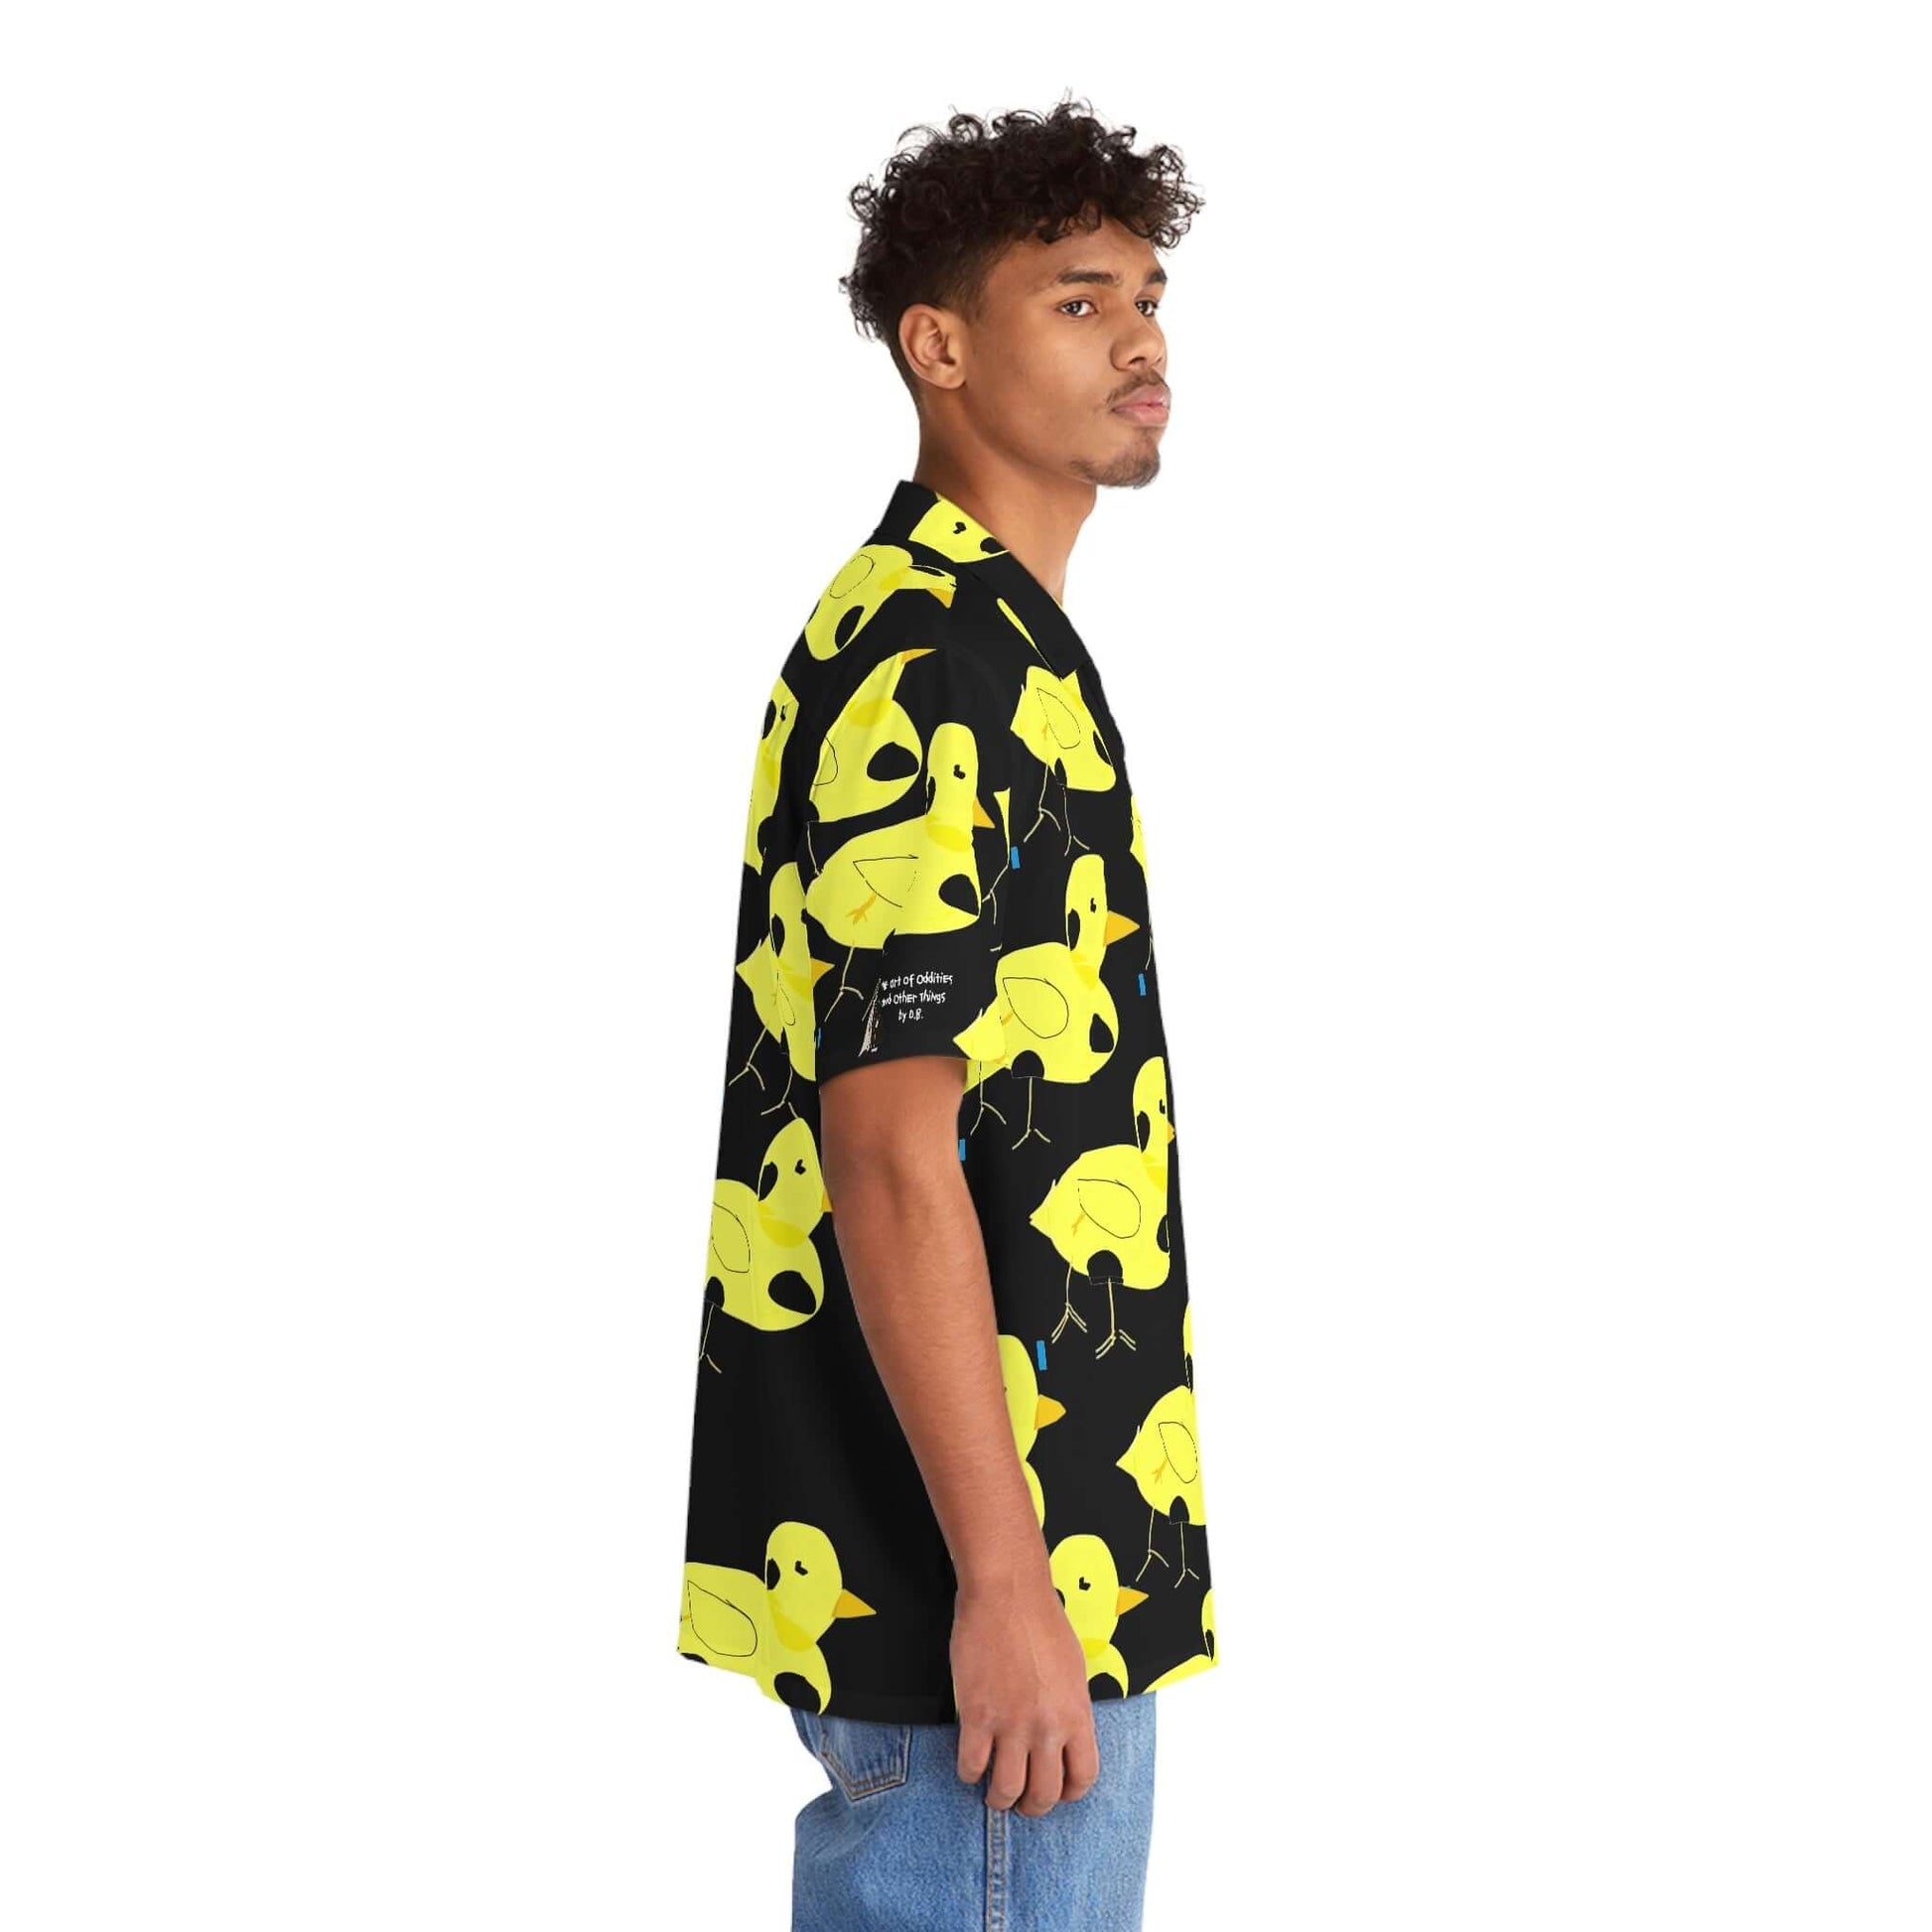 Black button up Hawaiian Shirt with bright yellow Four-Legged Chicken print by young disabled artist D.B.